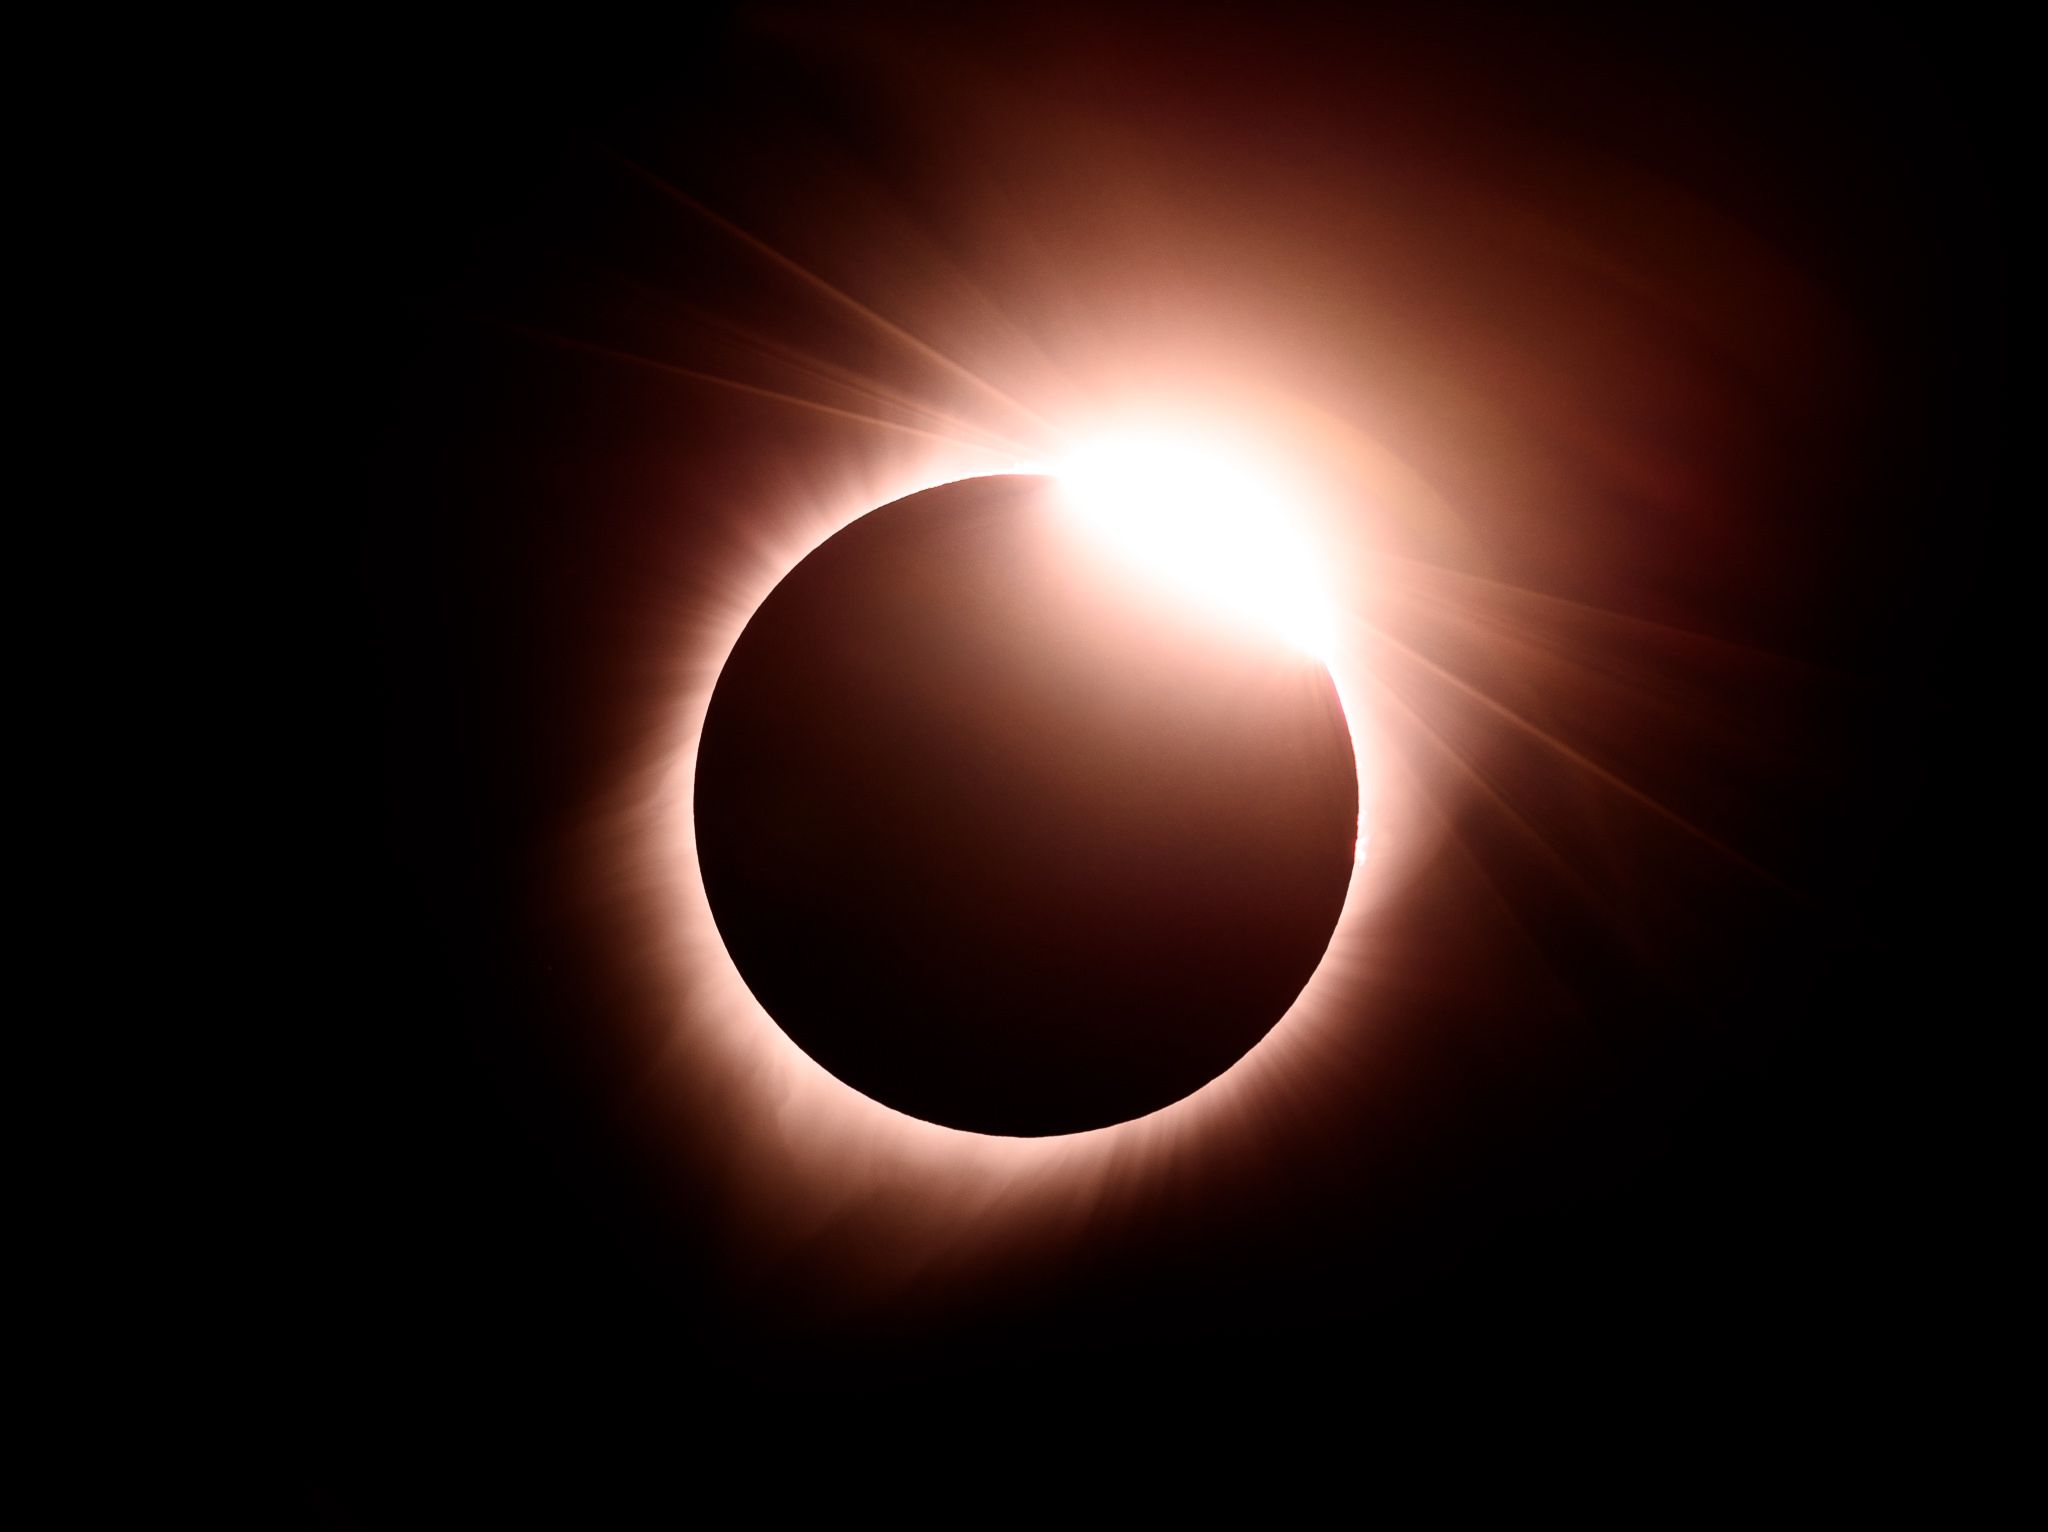 How to Photograph a Solar Eclipse Camera Gear to Settings